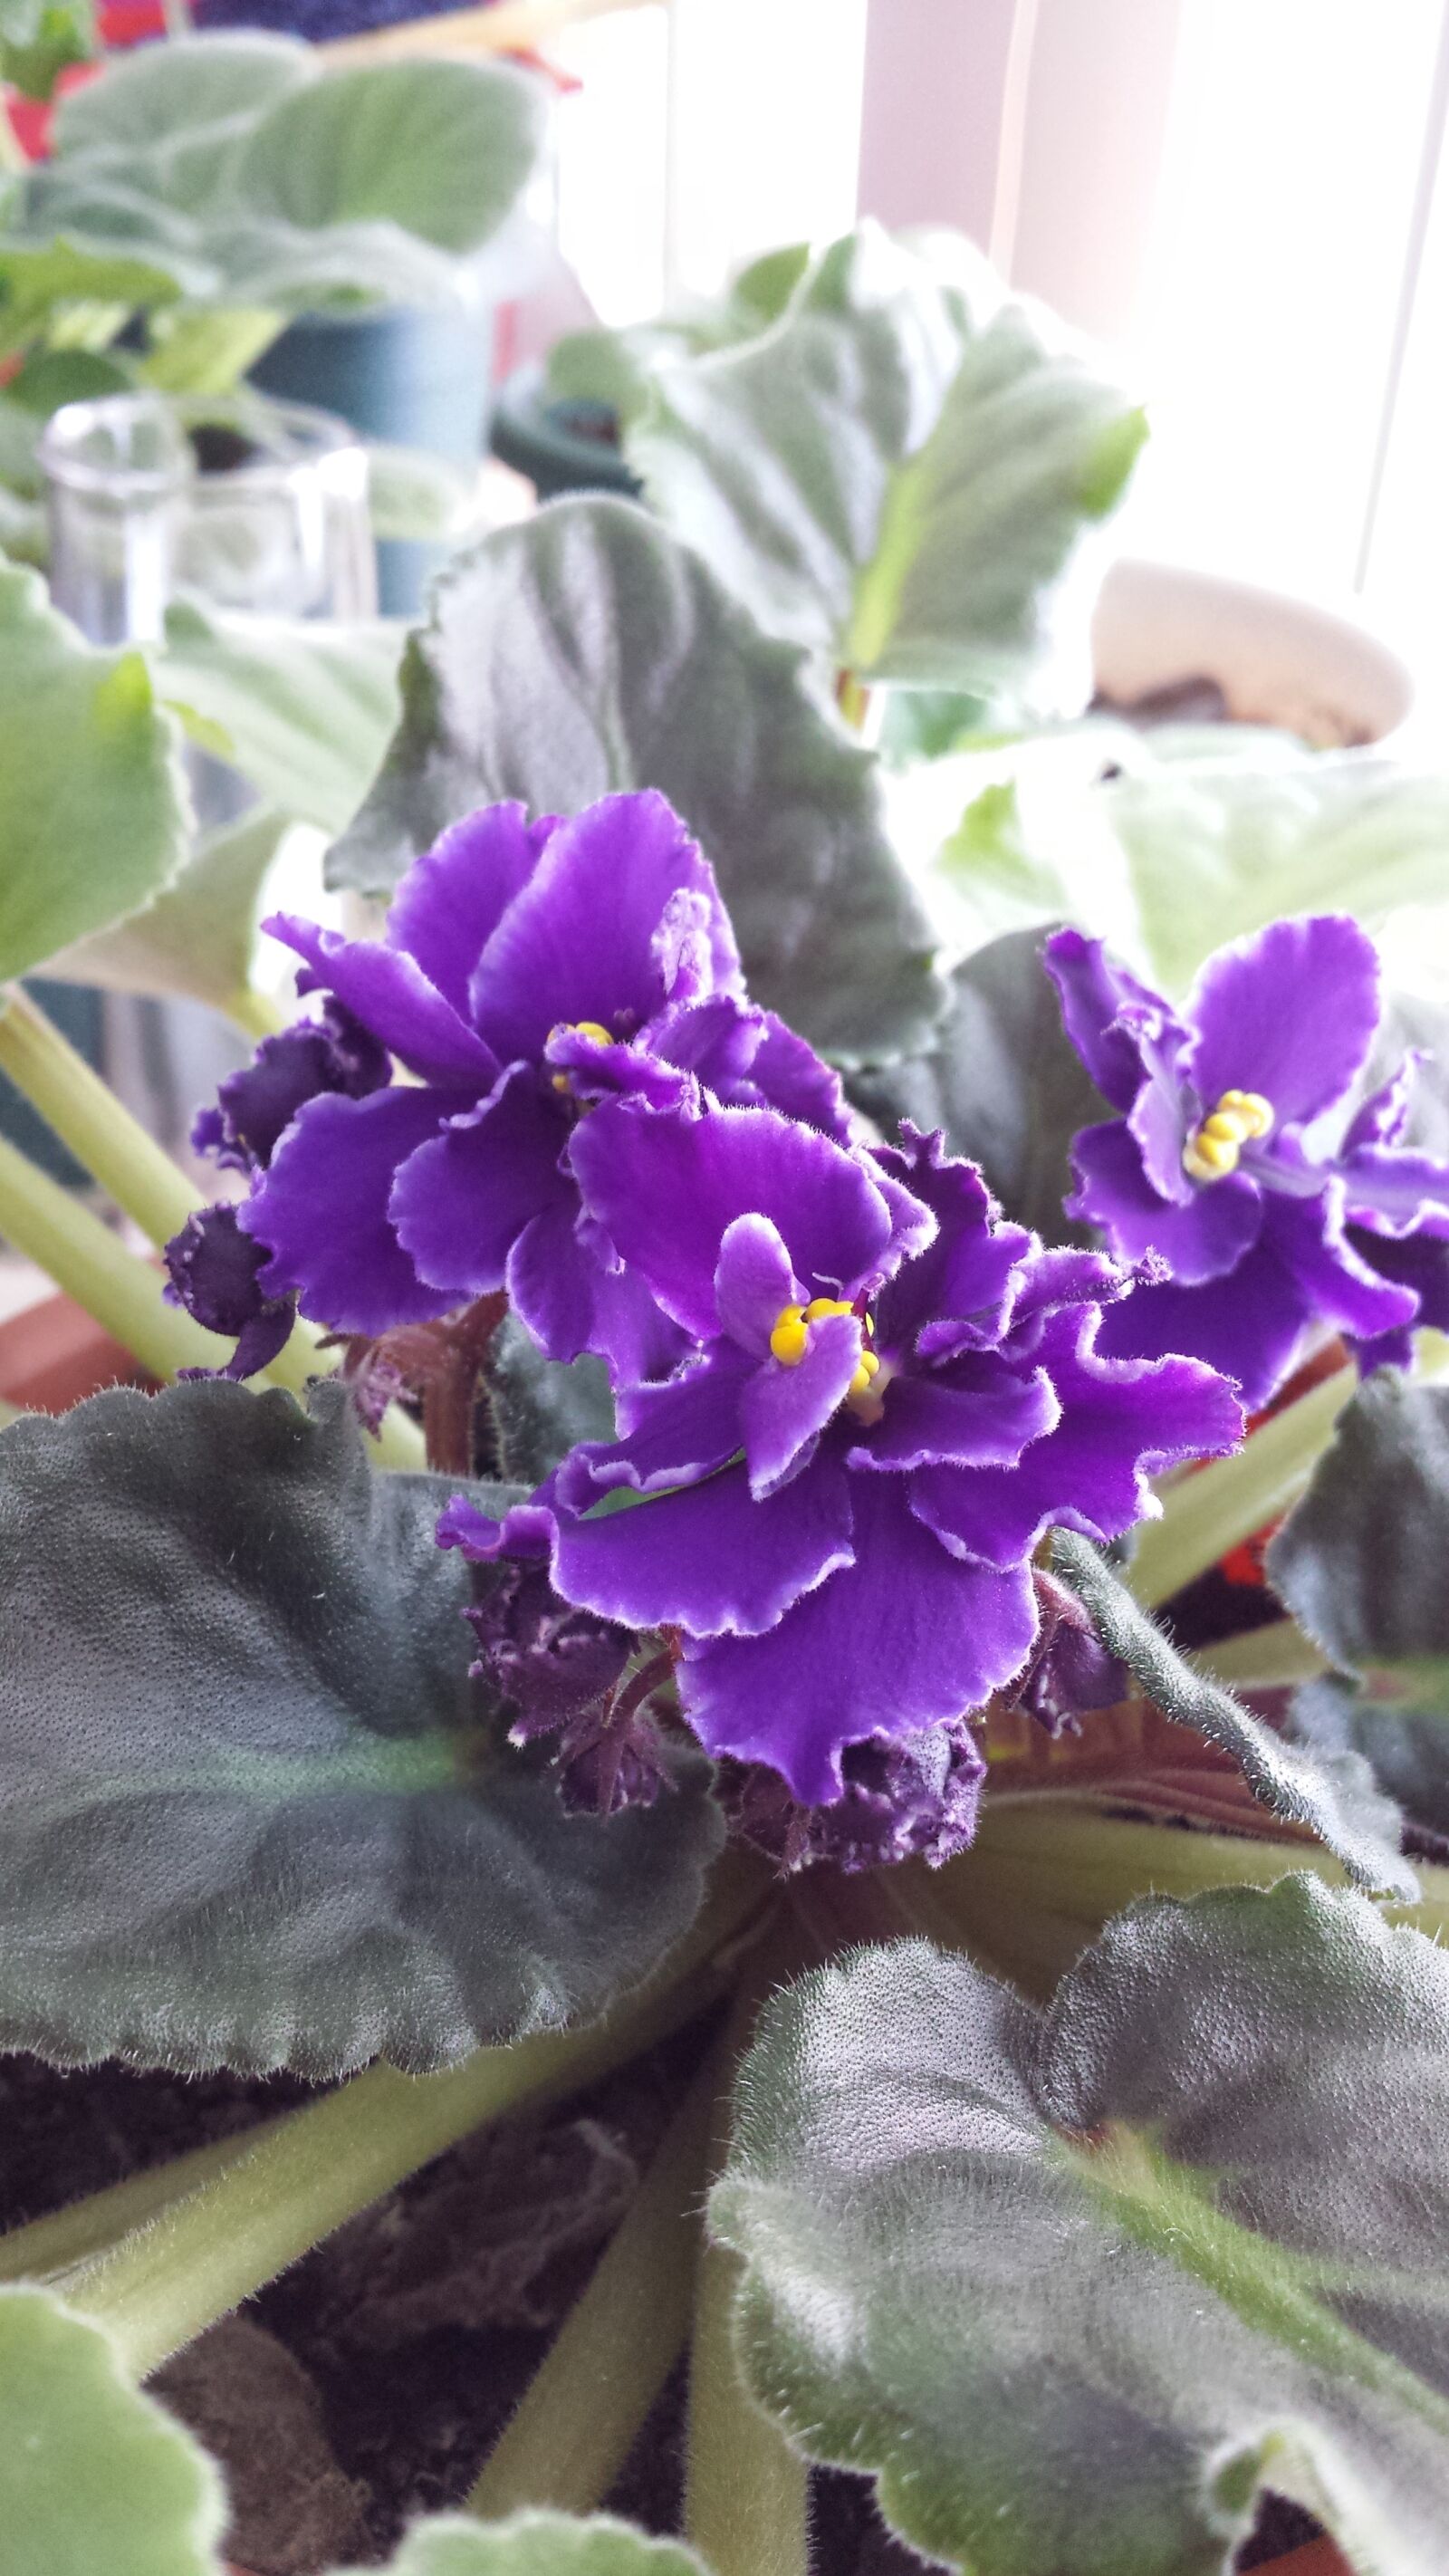 Samsung Galaxy S4 sample photo. Purple, flowers, violets, in photography